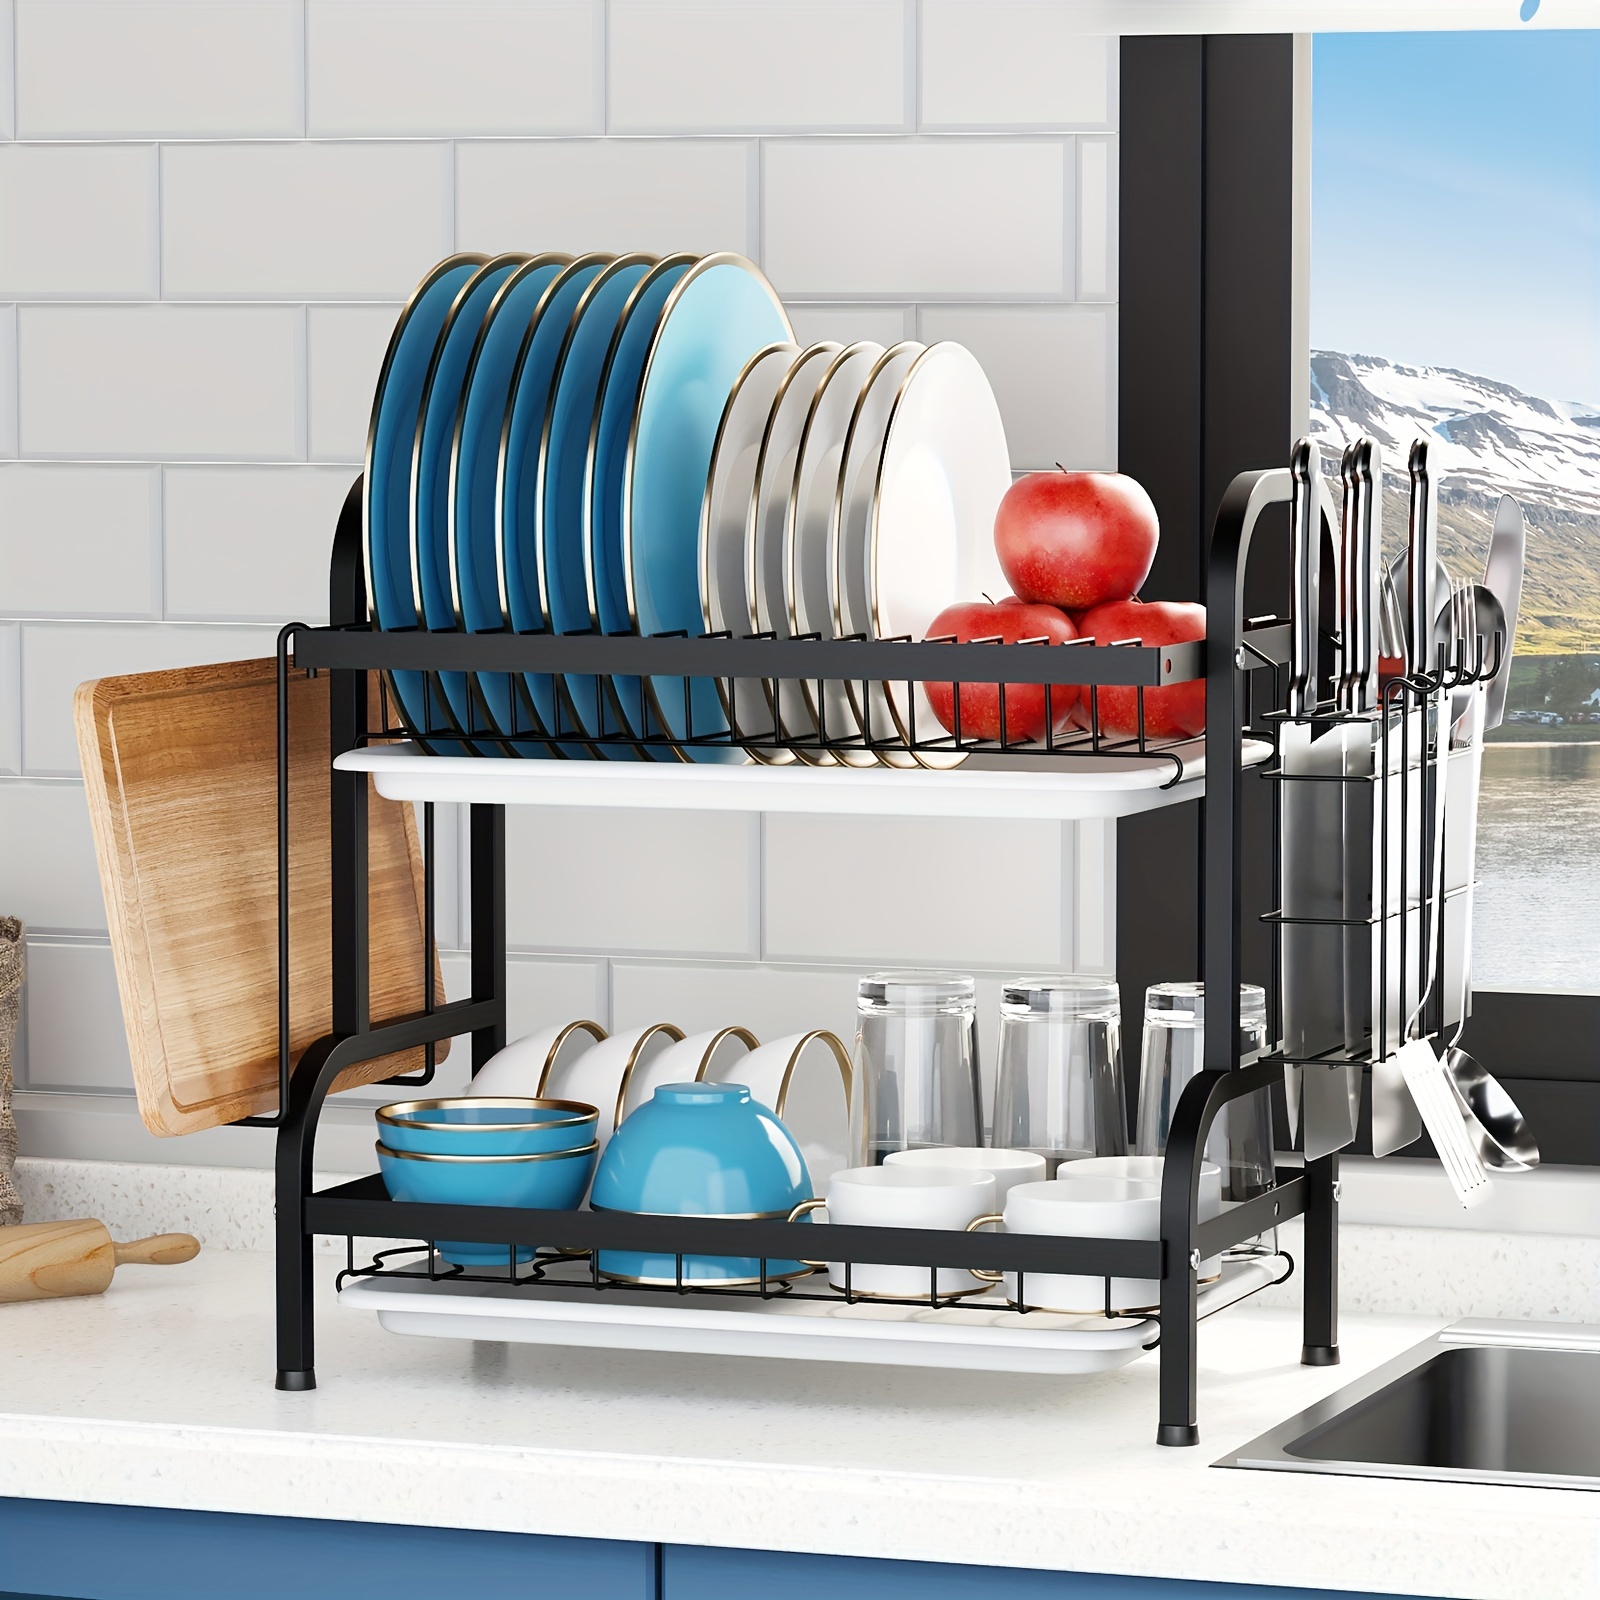 2/3 Tiers Dish Drying Rack, Dish Rack With Drainboard, Kitchen